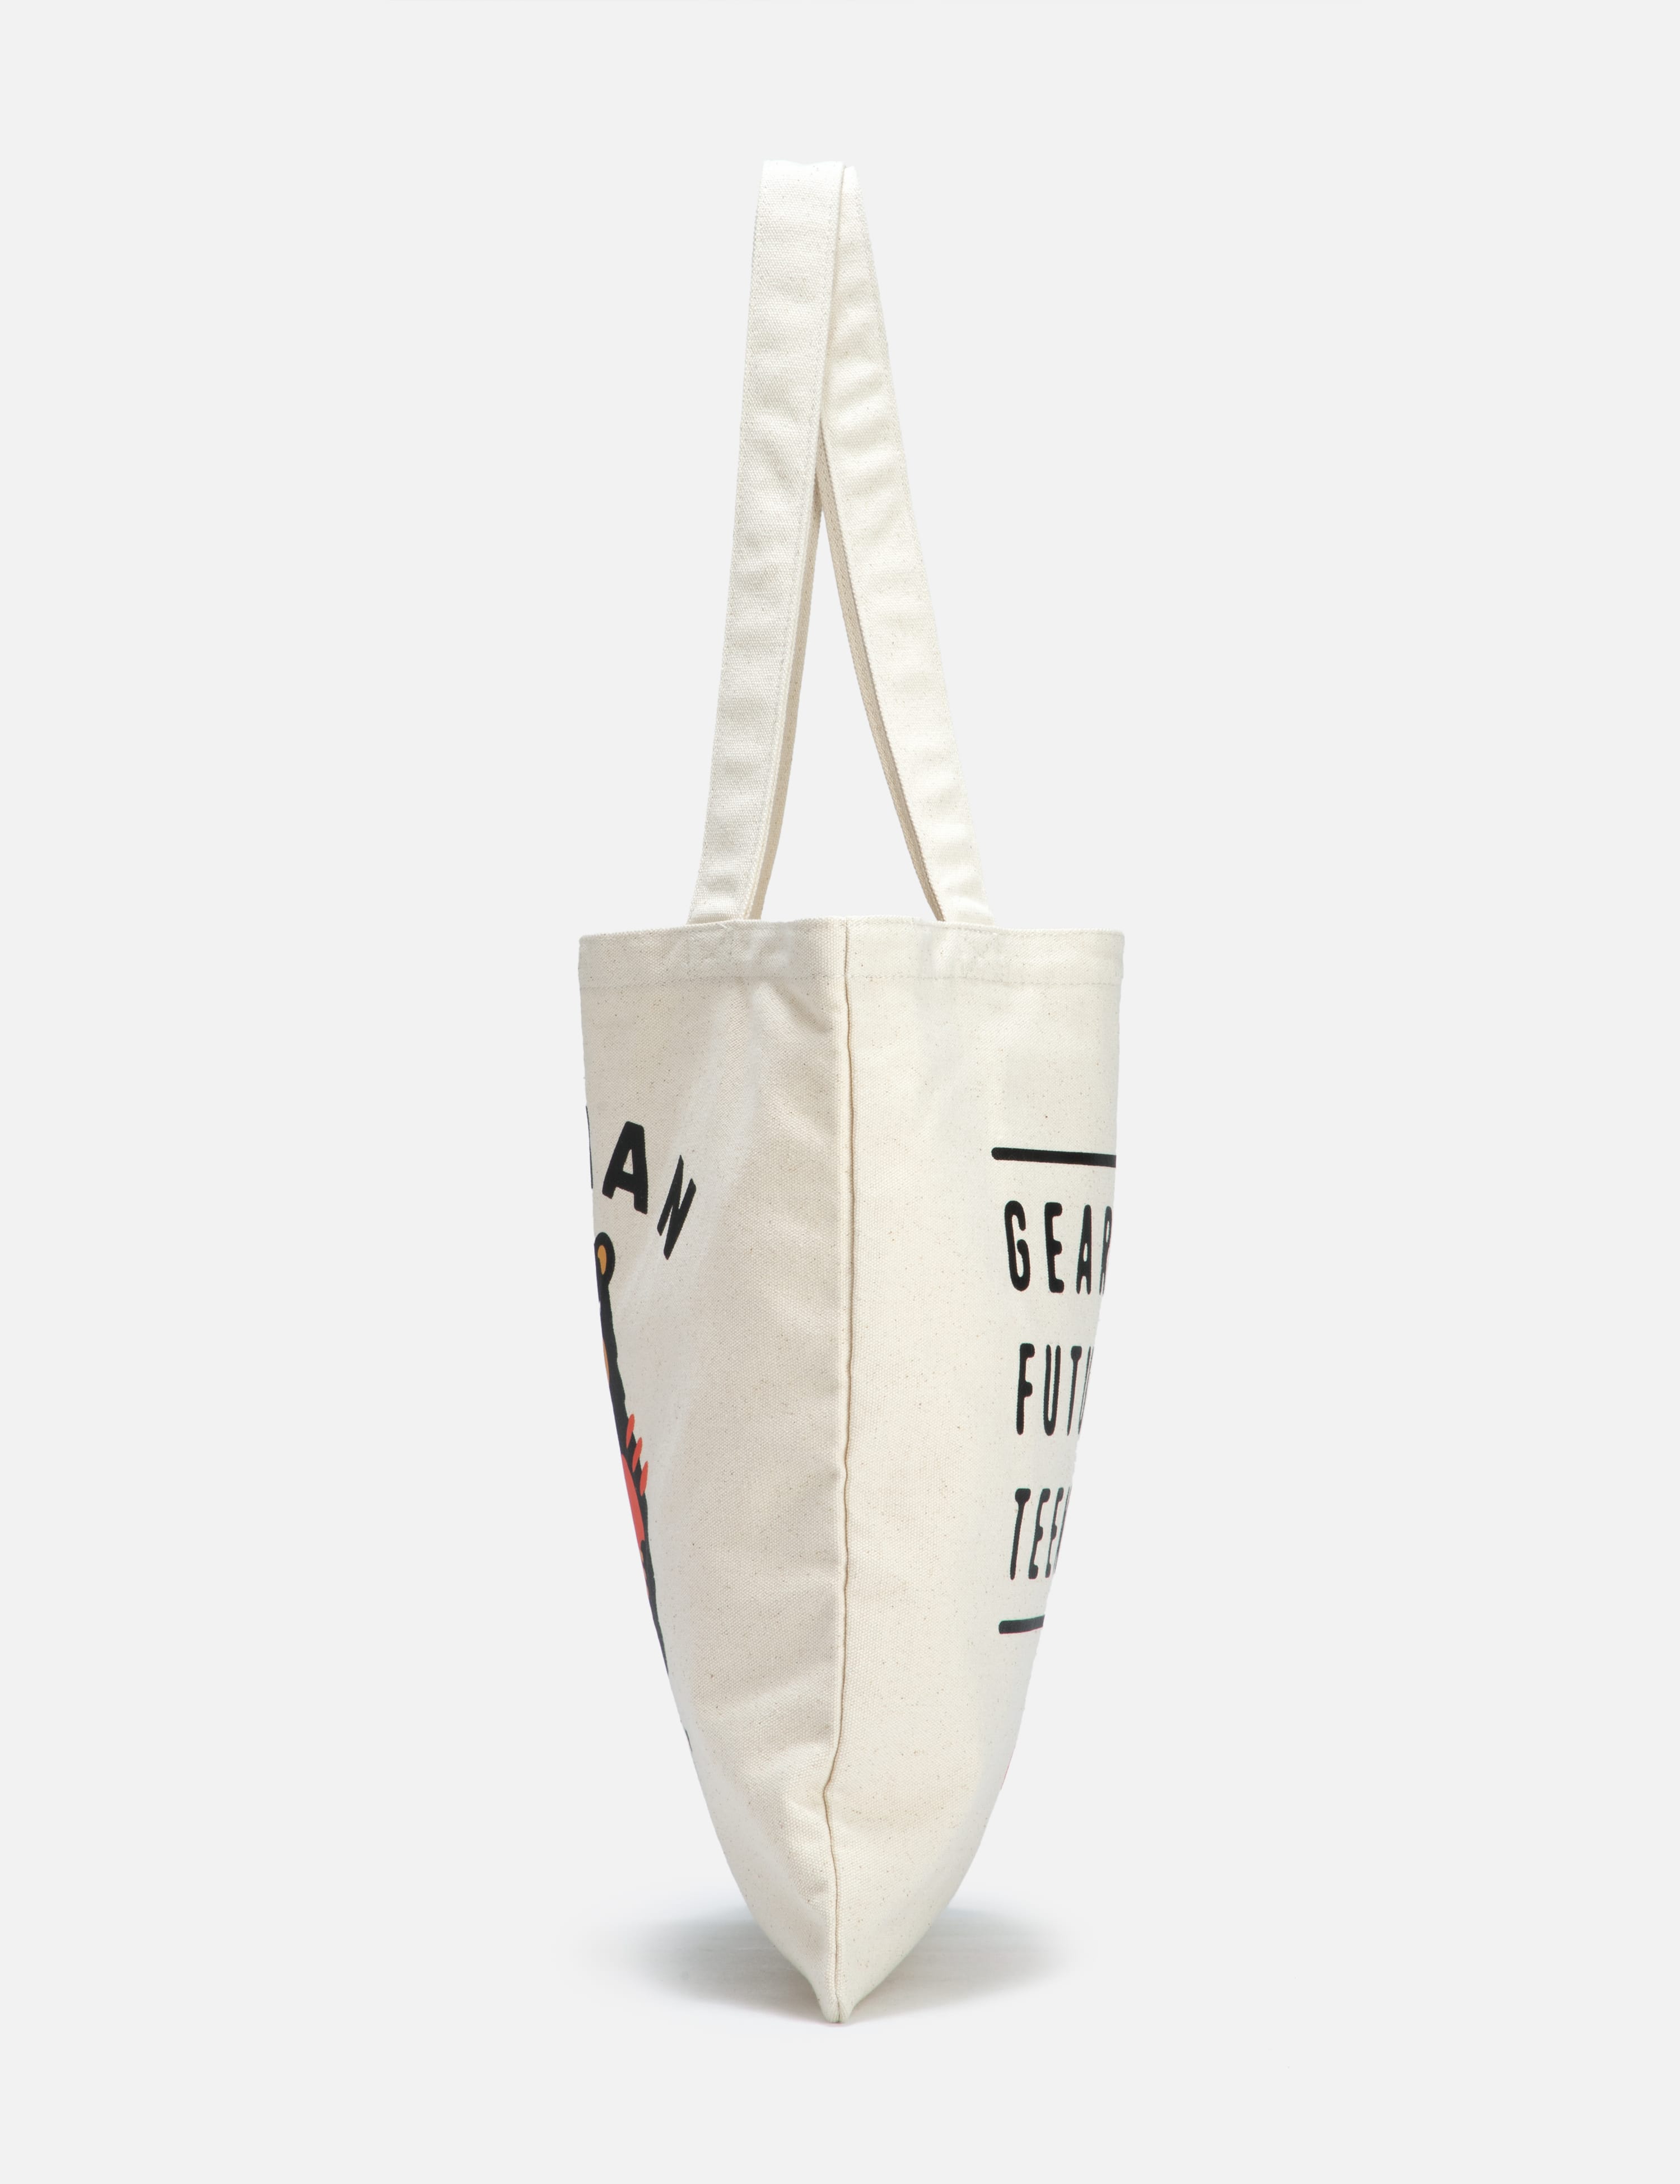 Human Made - BOOK TOTE | HBX - Globally Curated Fashion and